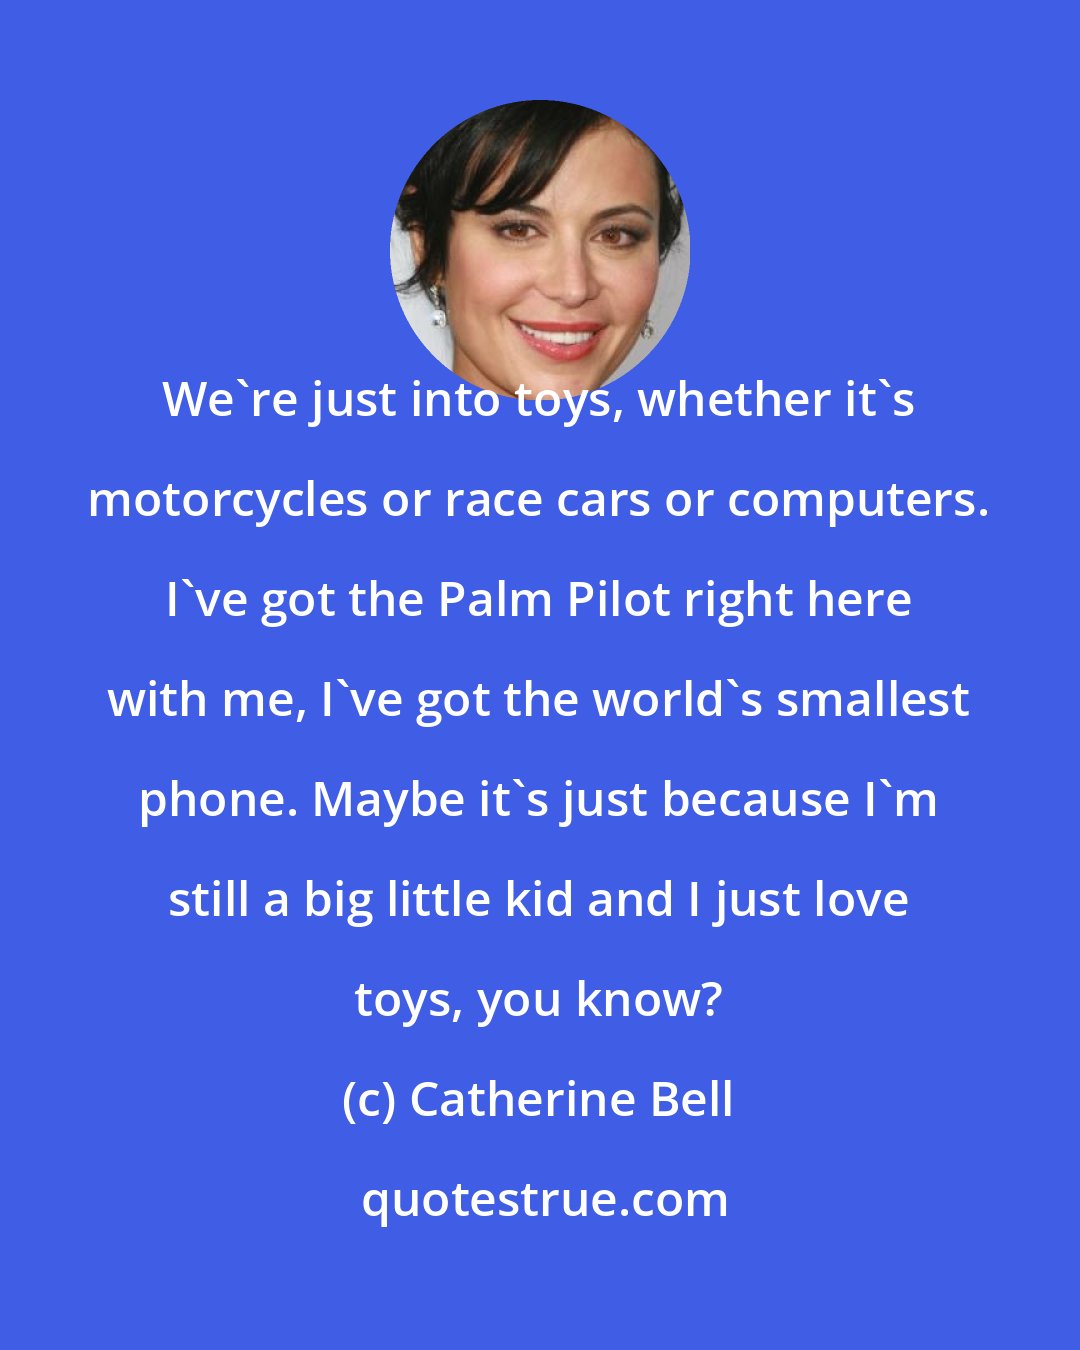 Catherine Bell: We're just into toys, whether it's motorcycles or race cars or computers. I've got the Palm Pilot right here with me, I've got the world's smallest phone. Maybe it's just because I'm still a big little kid and I just love toys, you know?